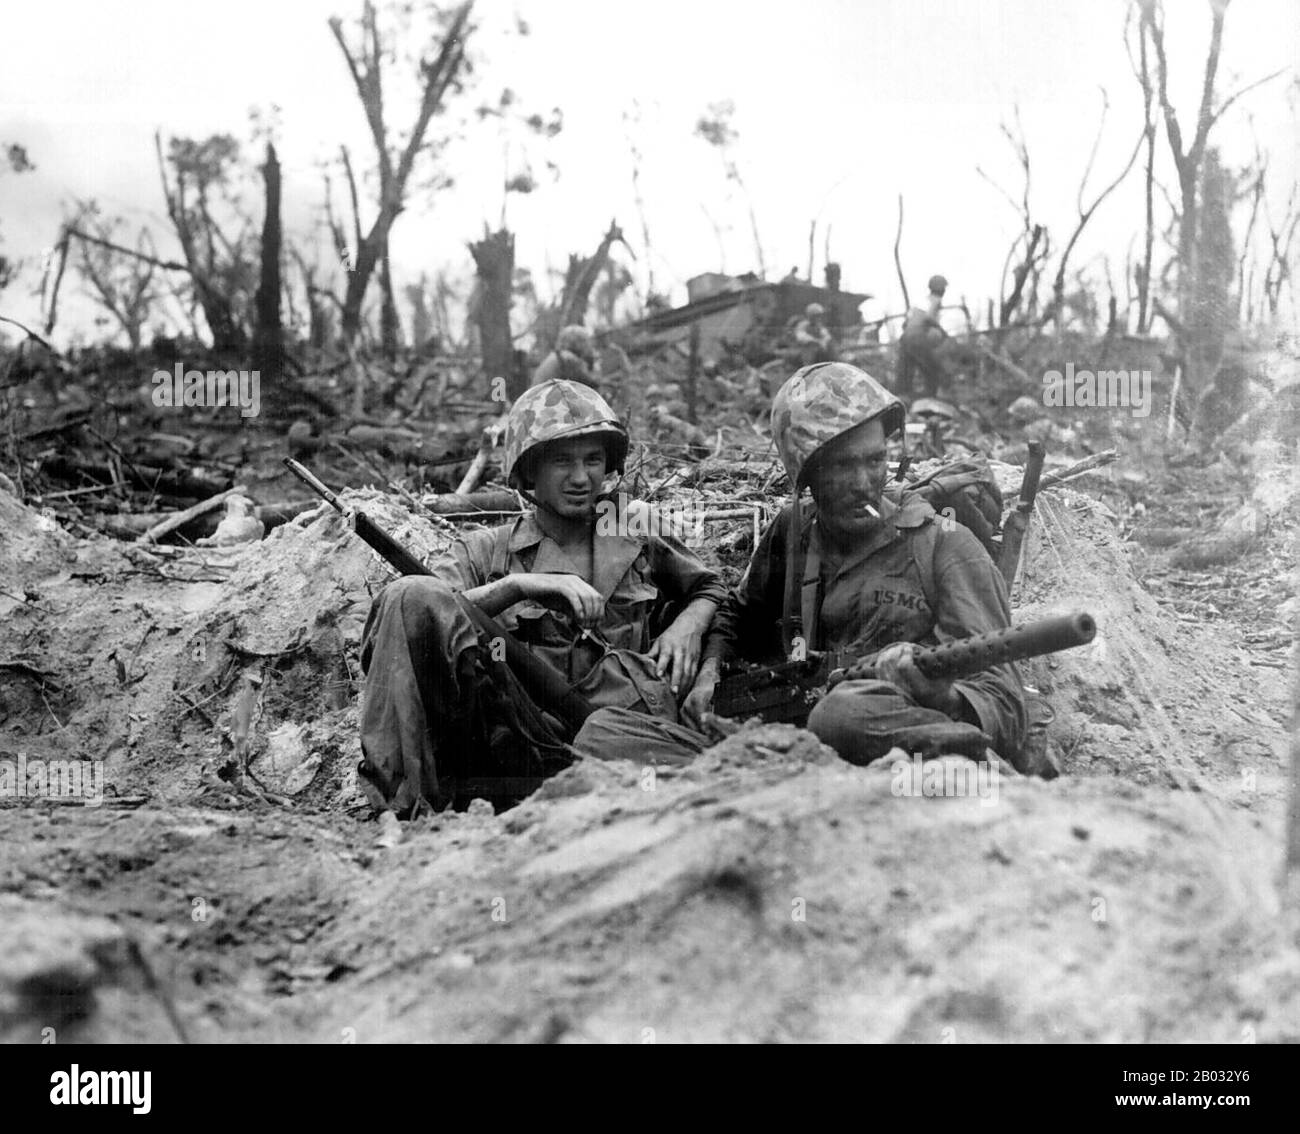 The Battle of Peleliu was fought between the United States and the Empire of Japan in the Pacific Theater of World War II, from September to November 1944 on the island of Peleliu (in present-day Palau). U.S. Marines of the First Marine Division, and later soldiers of the U.S. Army's 81st Infantry Division, fought to capture an airstrip on the small coral island.  This battle was part of a larger offensive campaign known as Operation Forager, which ran from June to November 1944 in the Pacific Theater of Operations. Stock Photo